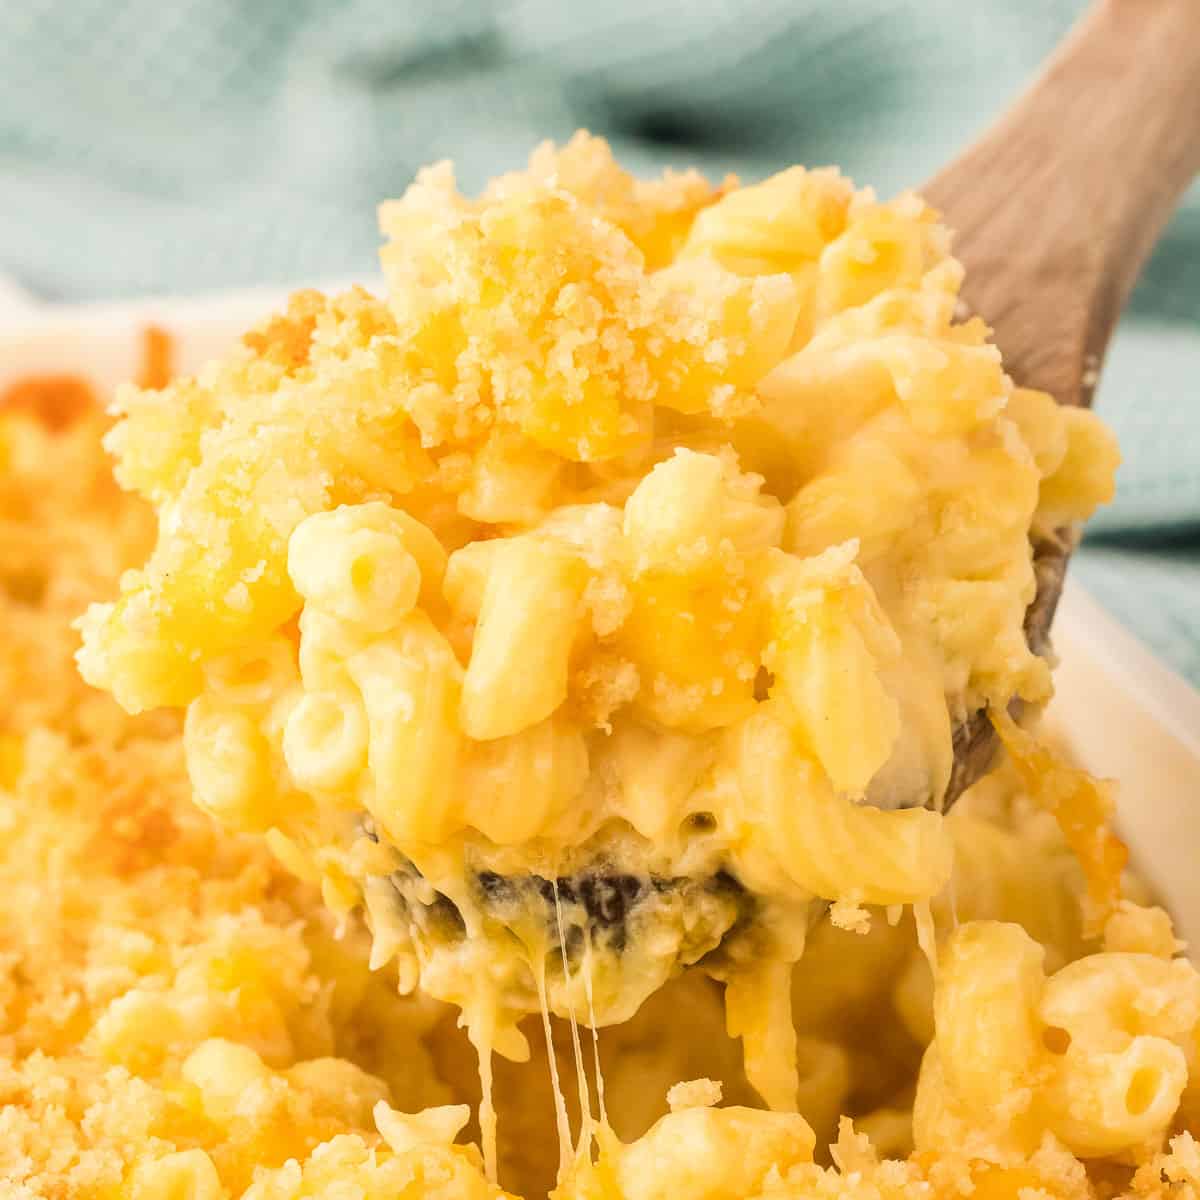 scooping mac and cheese from the baking dish